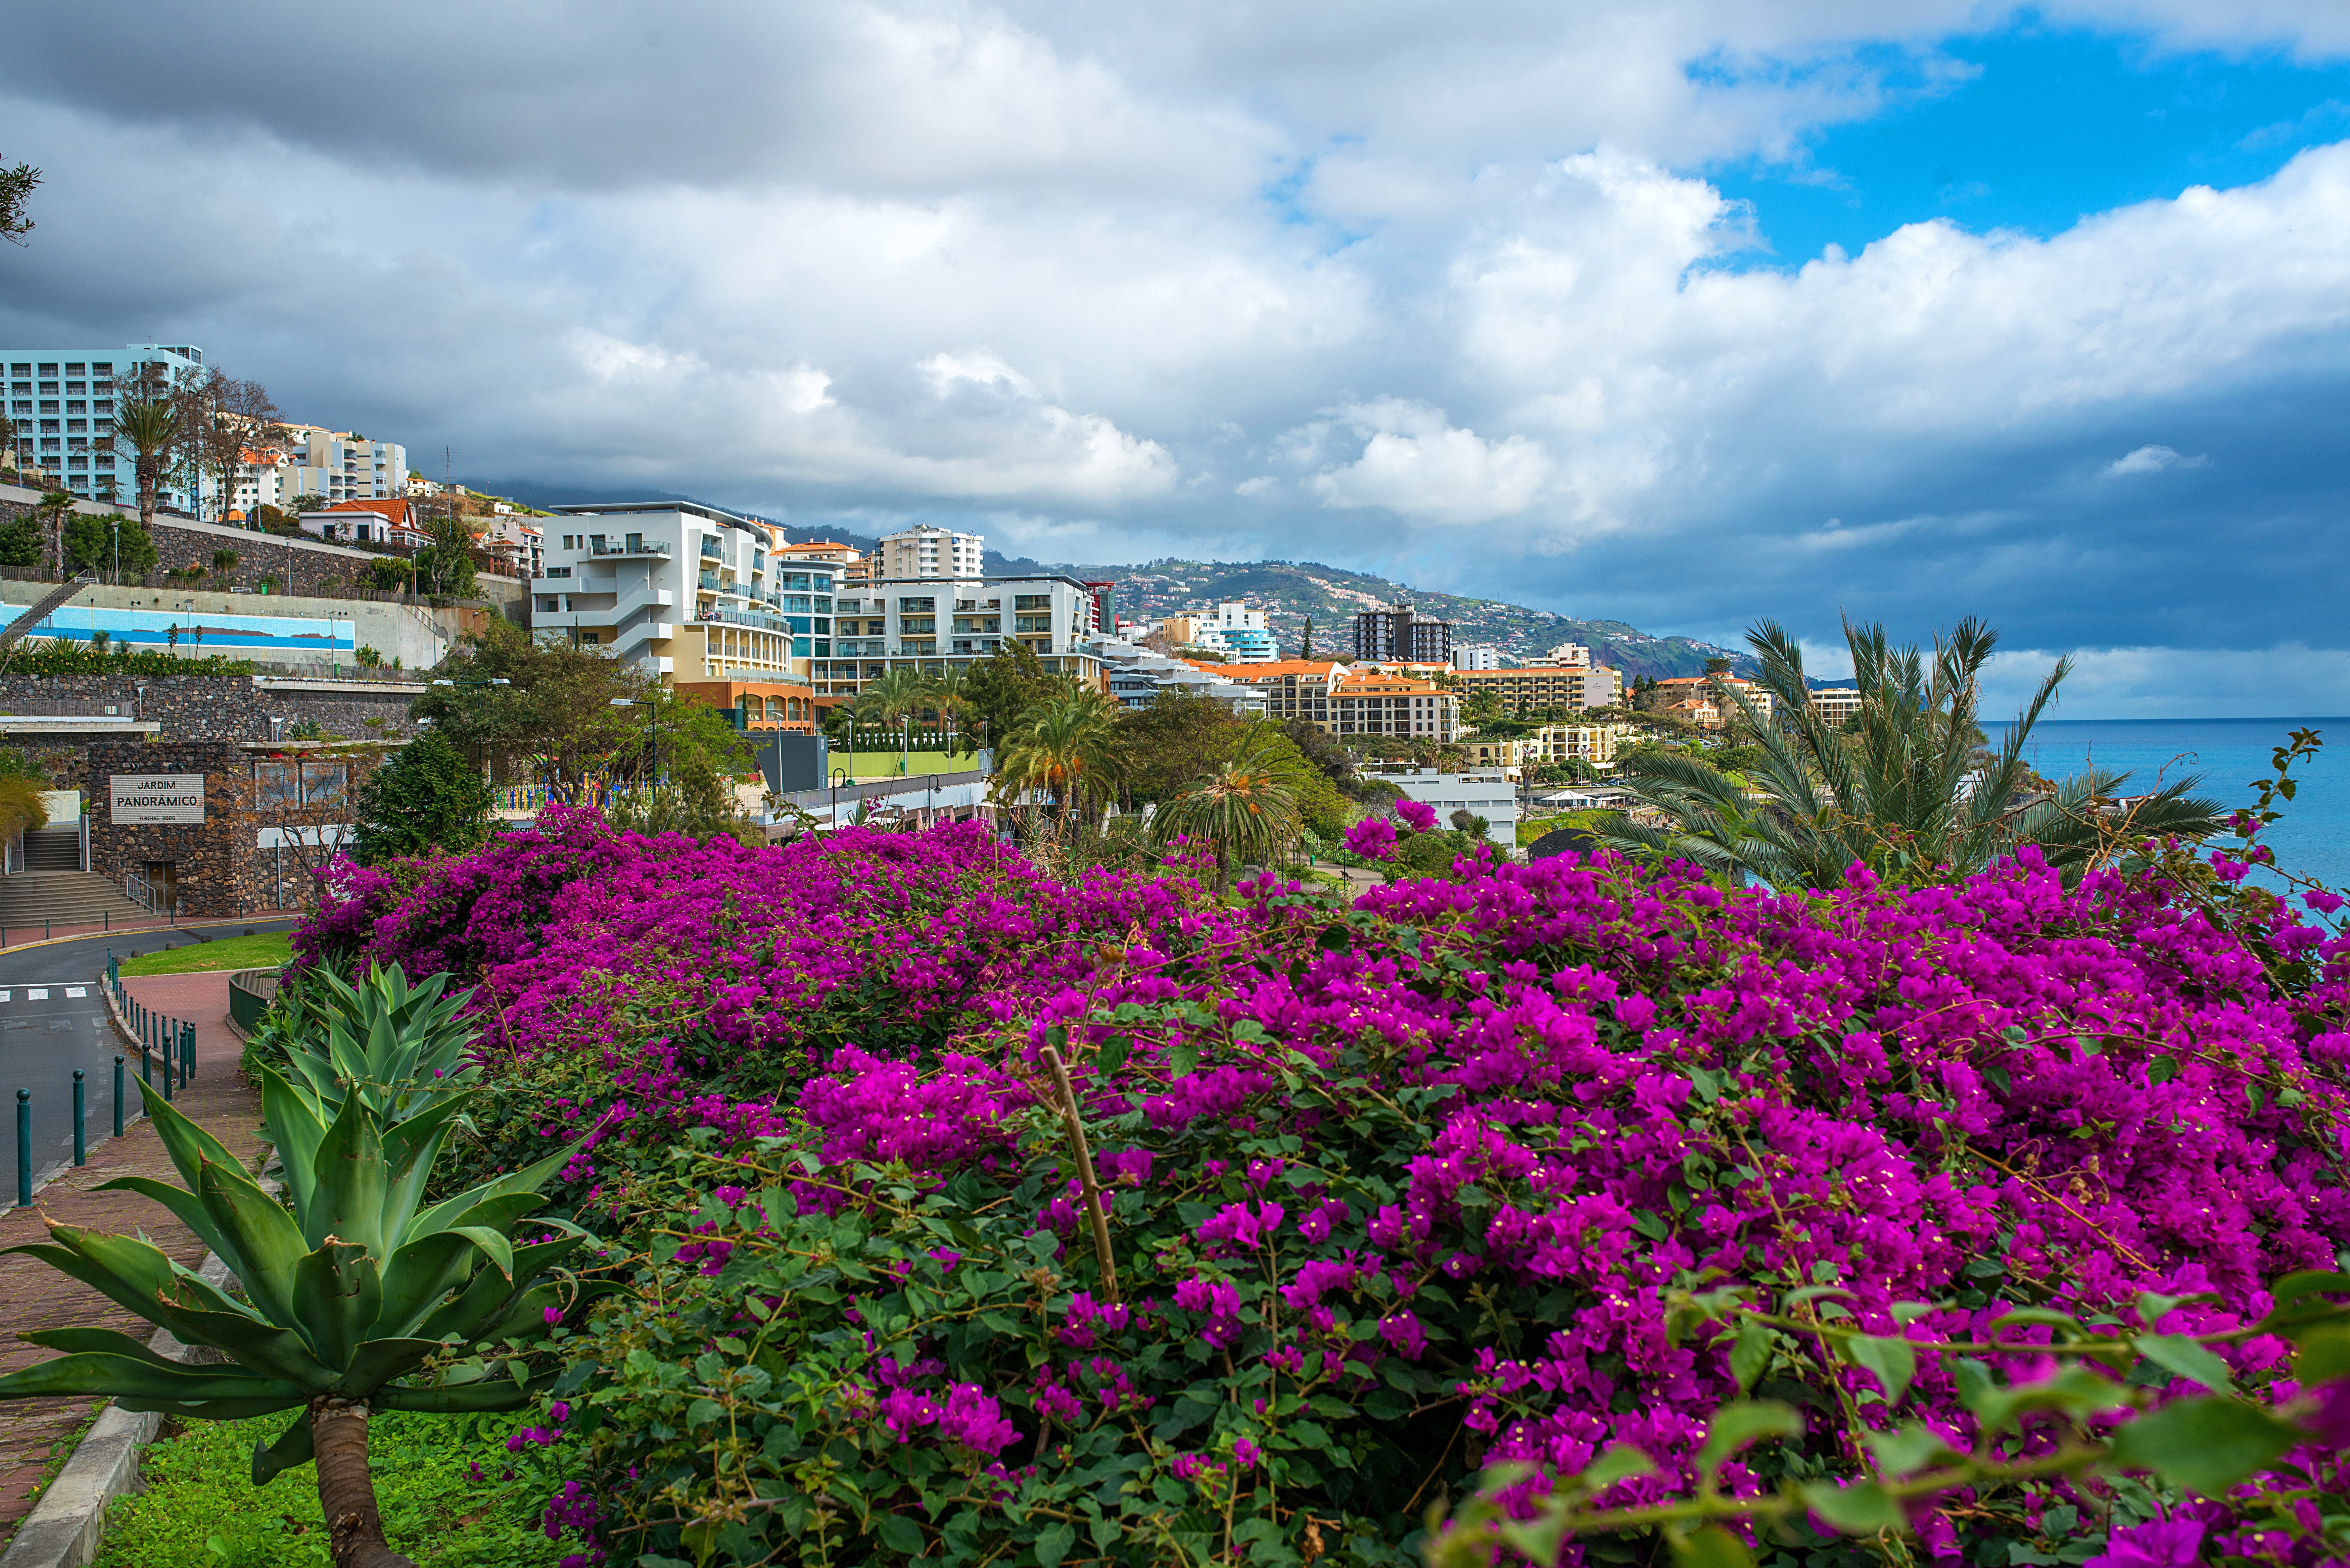 portugal, Houses, Bougainvillea, Clouds, Funchal, Madeira, Island, Cities Wallpaper